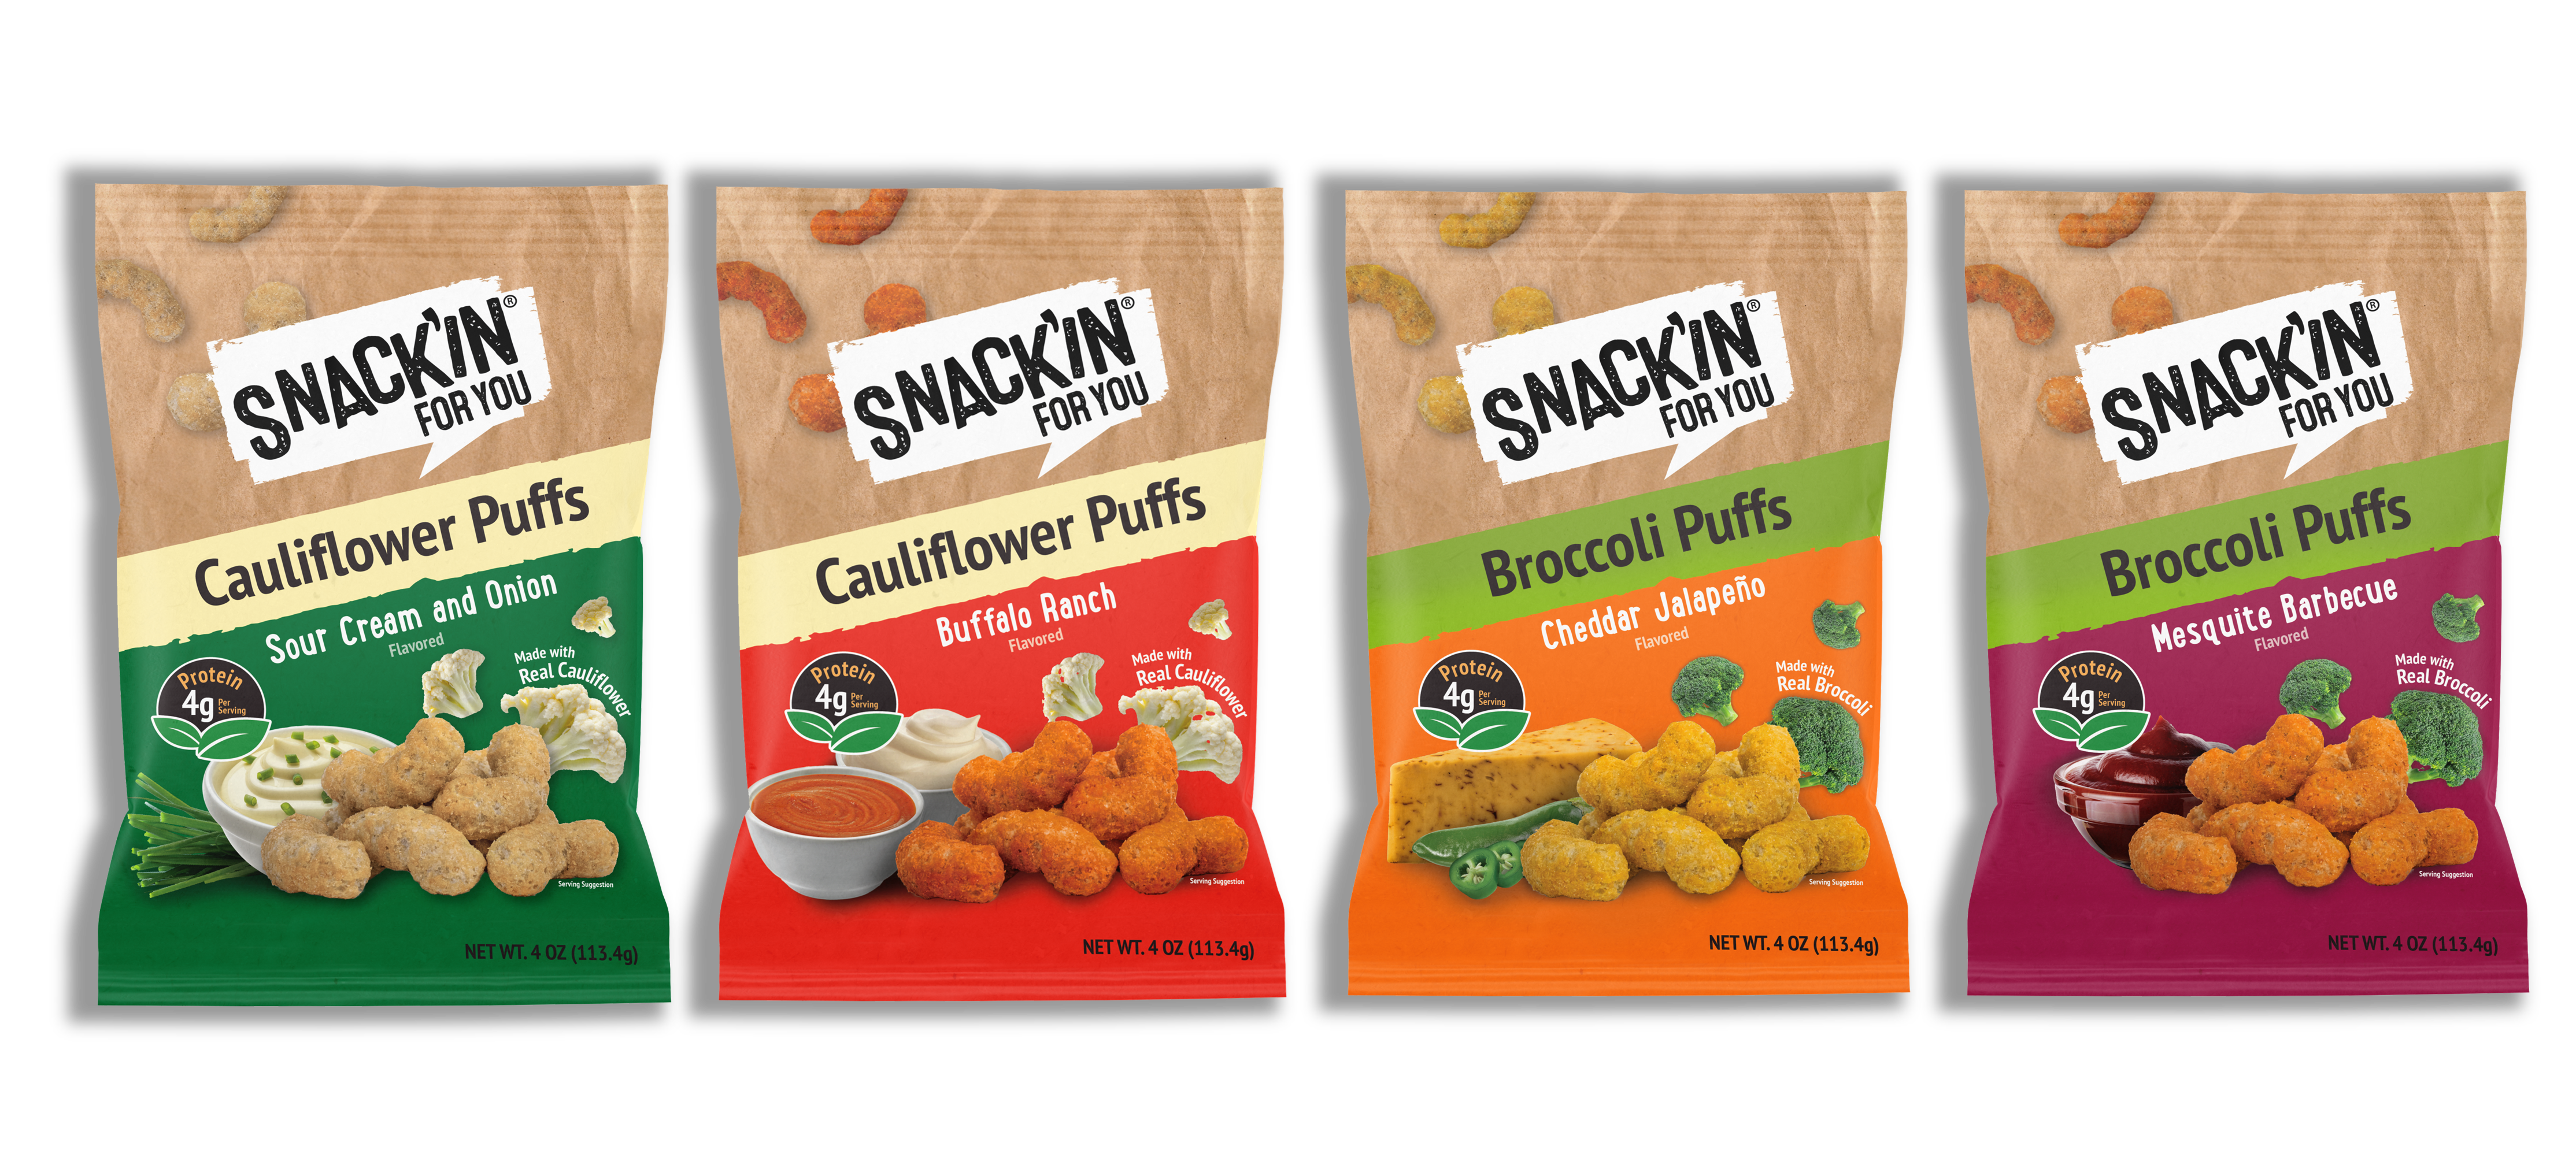 Snack'in For You's vegetable-based, high-protein, baked, better-for-you puffs are available as two- and four-ounce bags in Sour Cream and Onion Cauliflower, Buffalo Ranch Cauliflower, Mesquite Barbeque Broccoli, or Cheddar Jalapeno Broccoli flavor profiles.